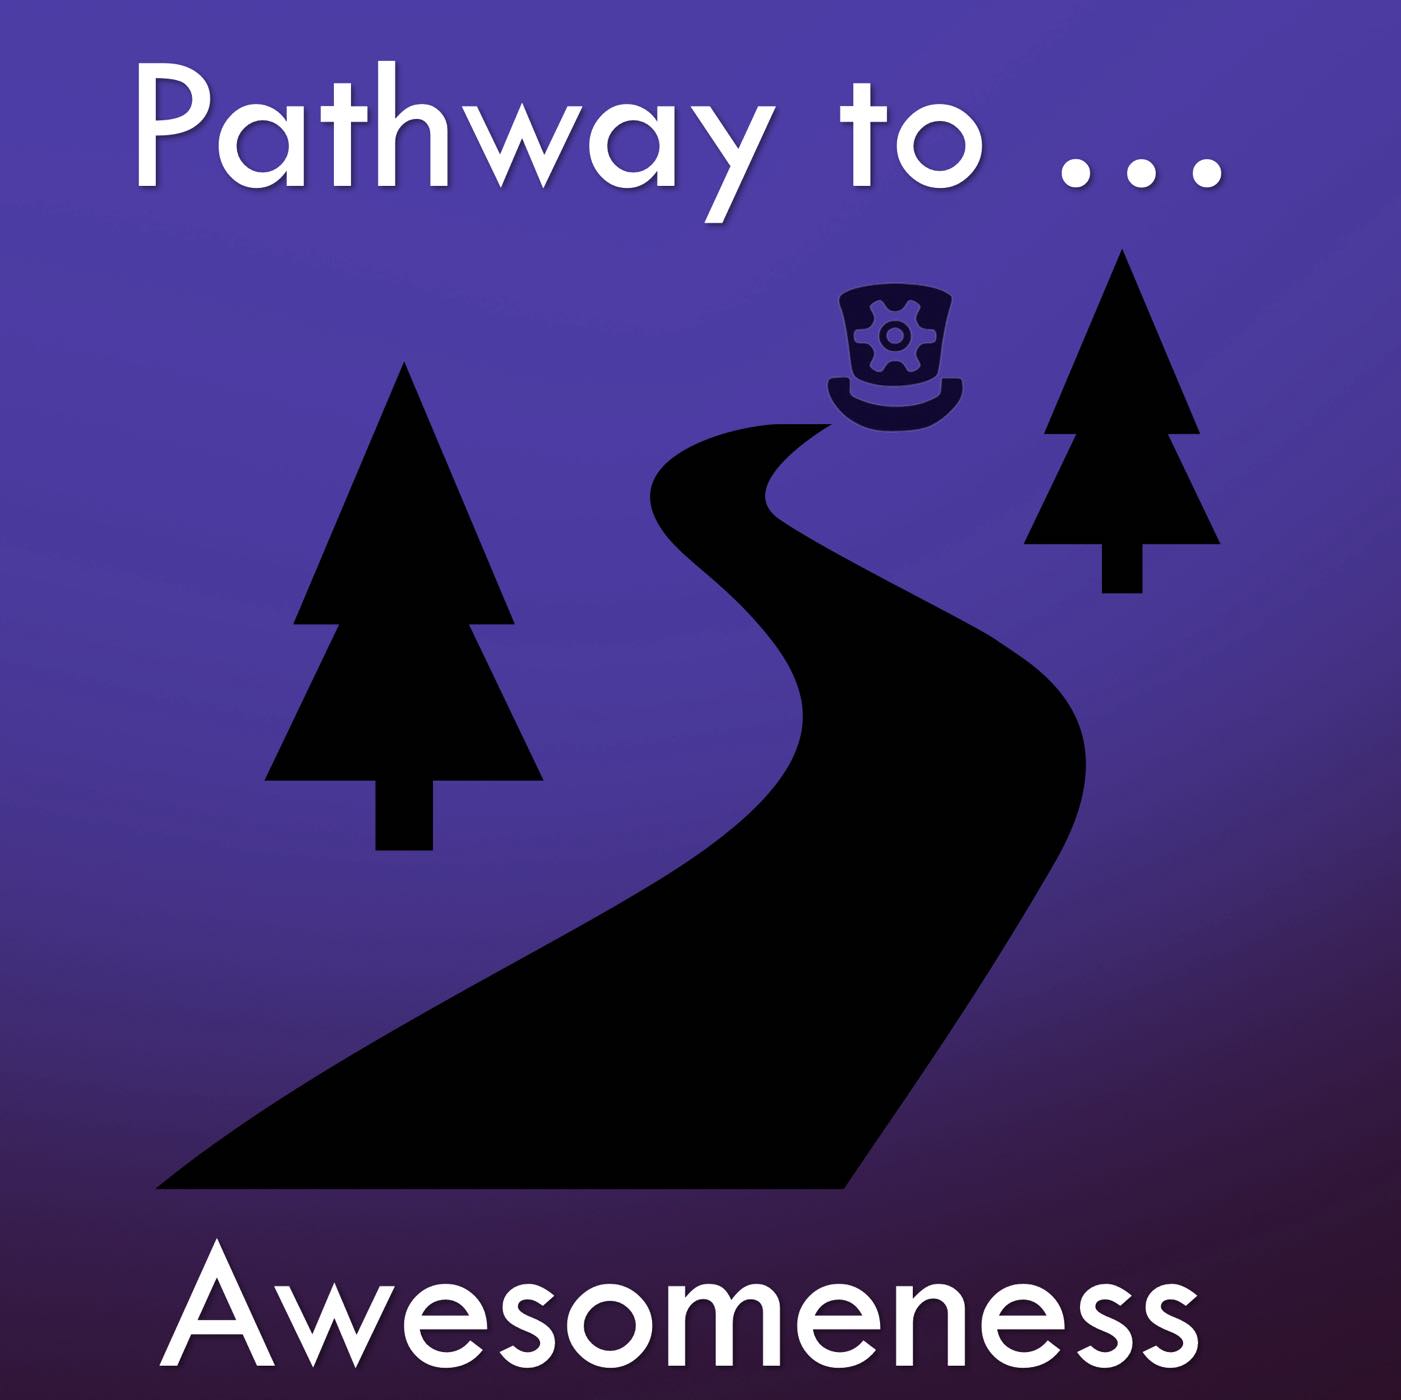 Pathway to Awesomeness